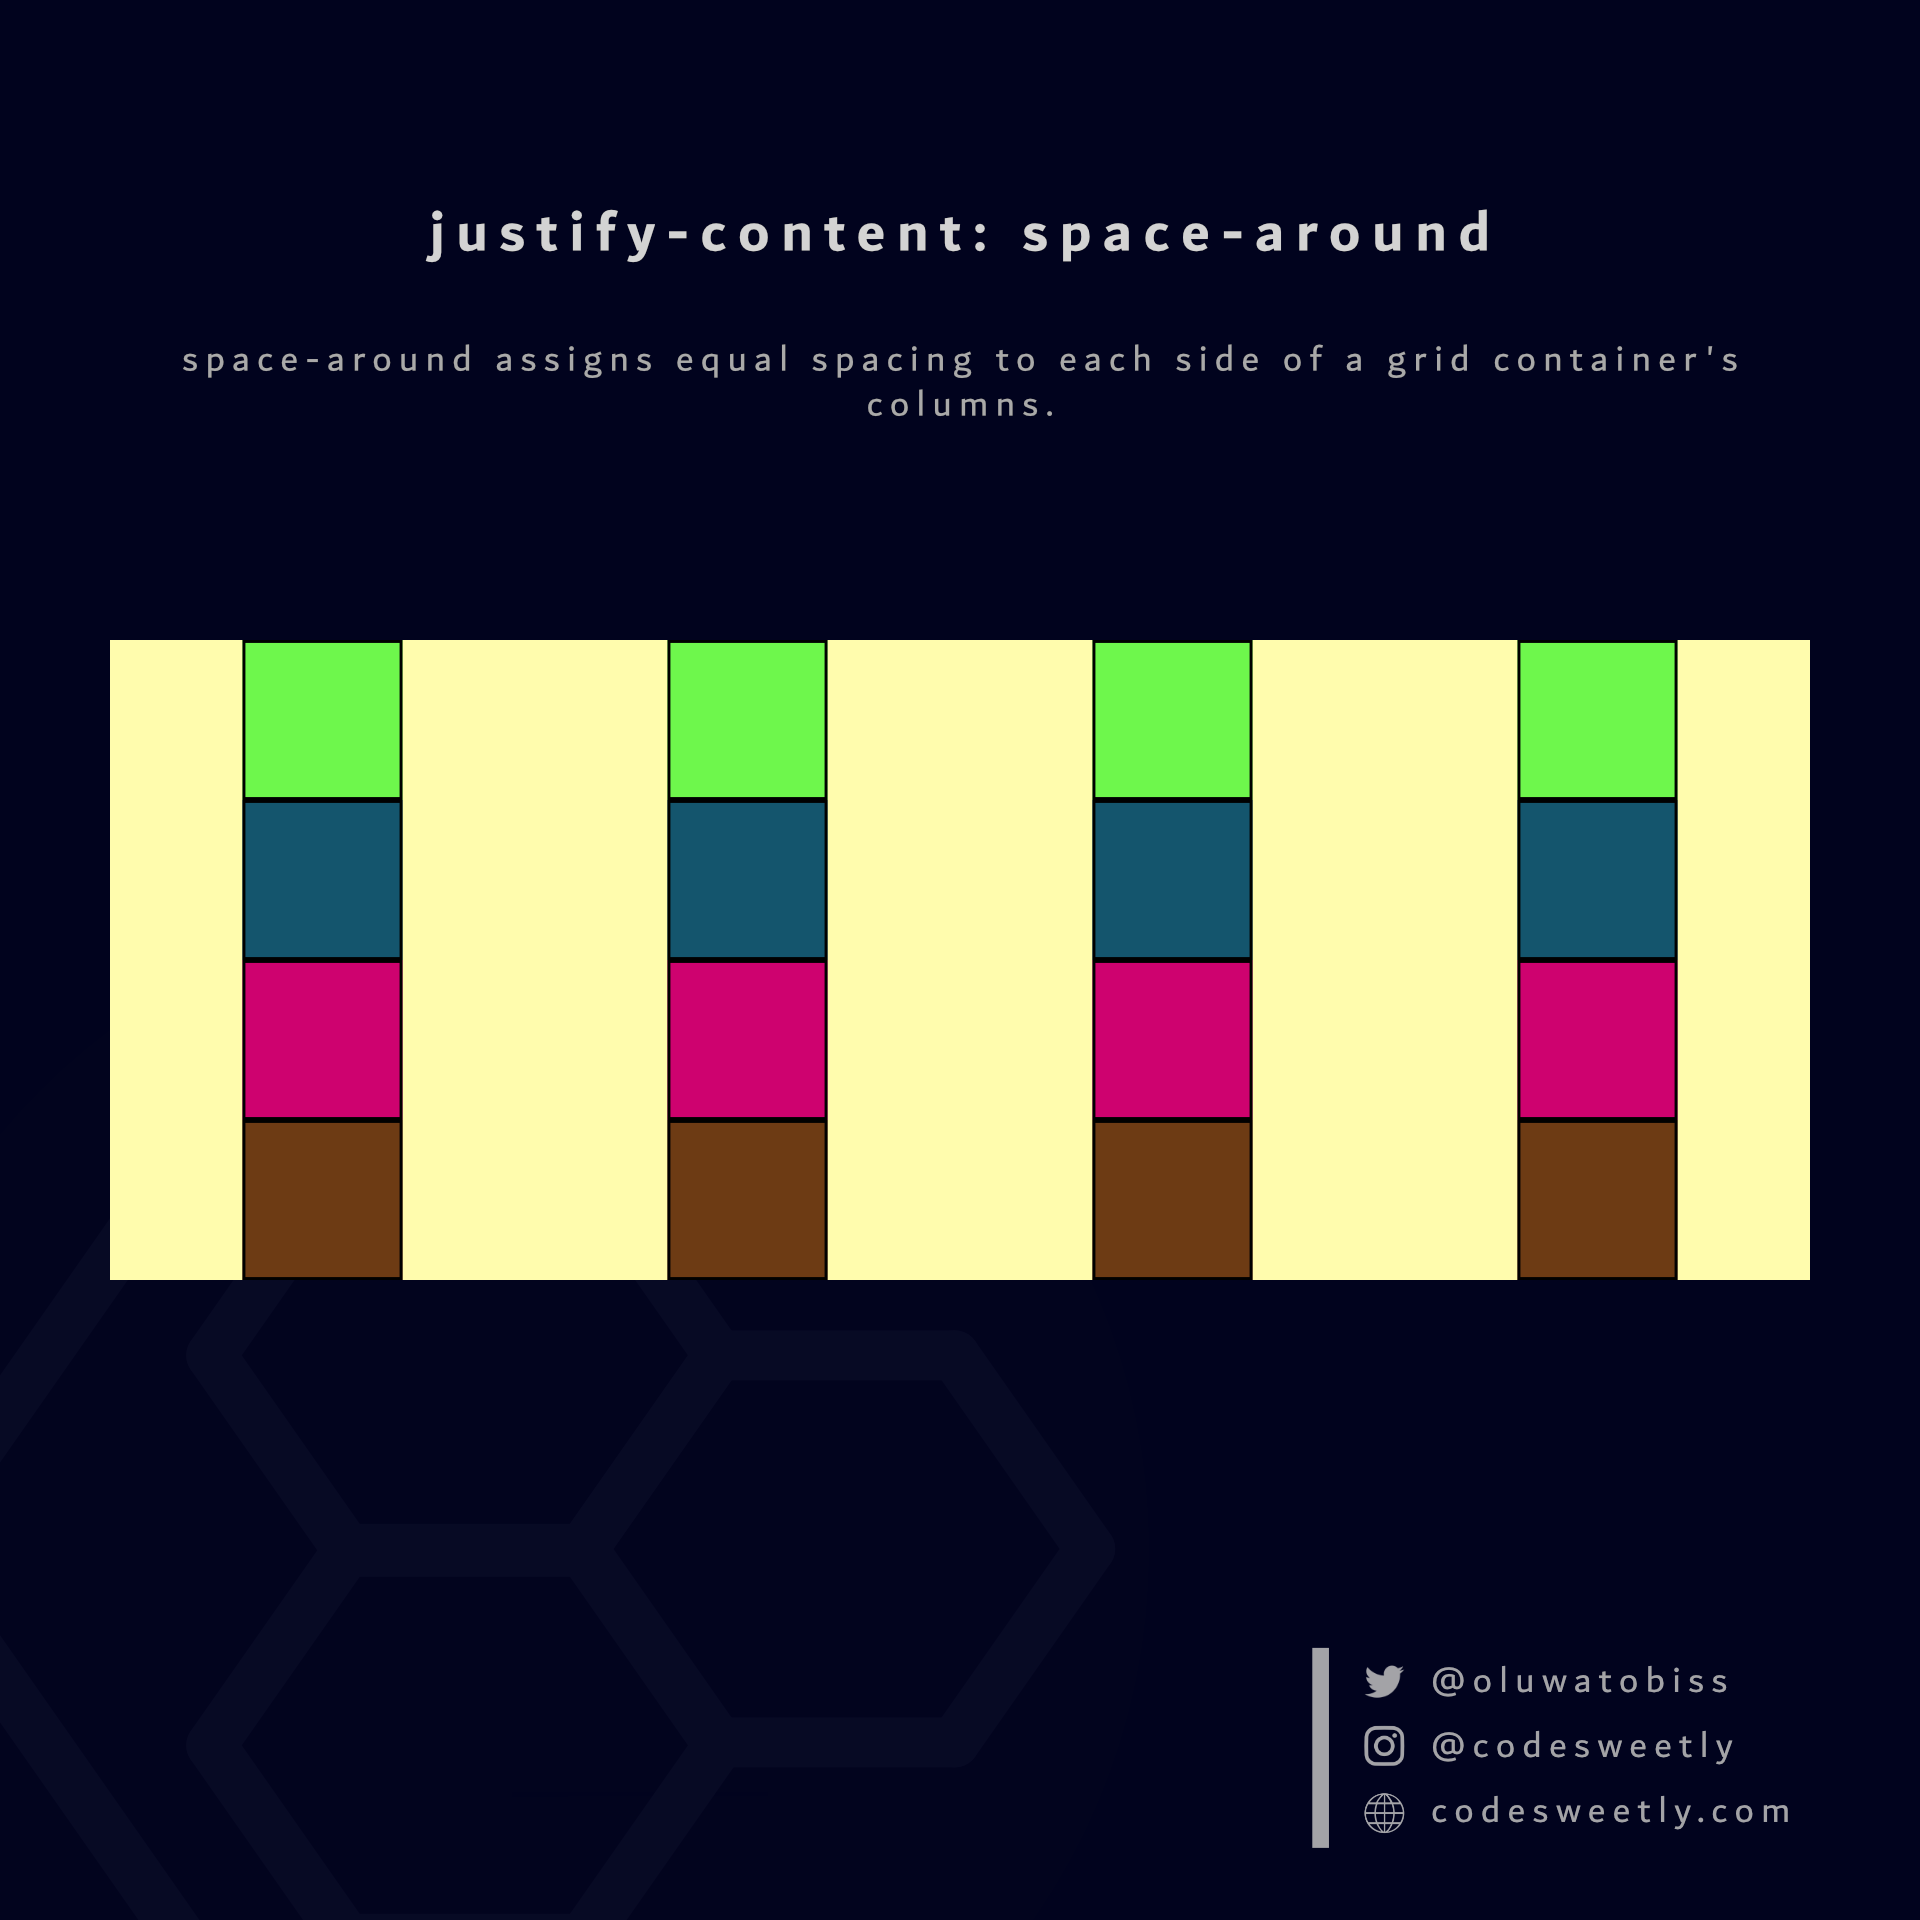 Illustration of justify-content&#39;s space-around value in CSS Grid